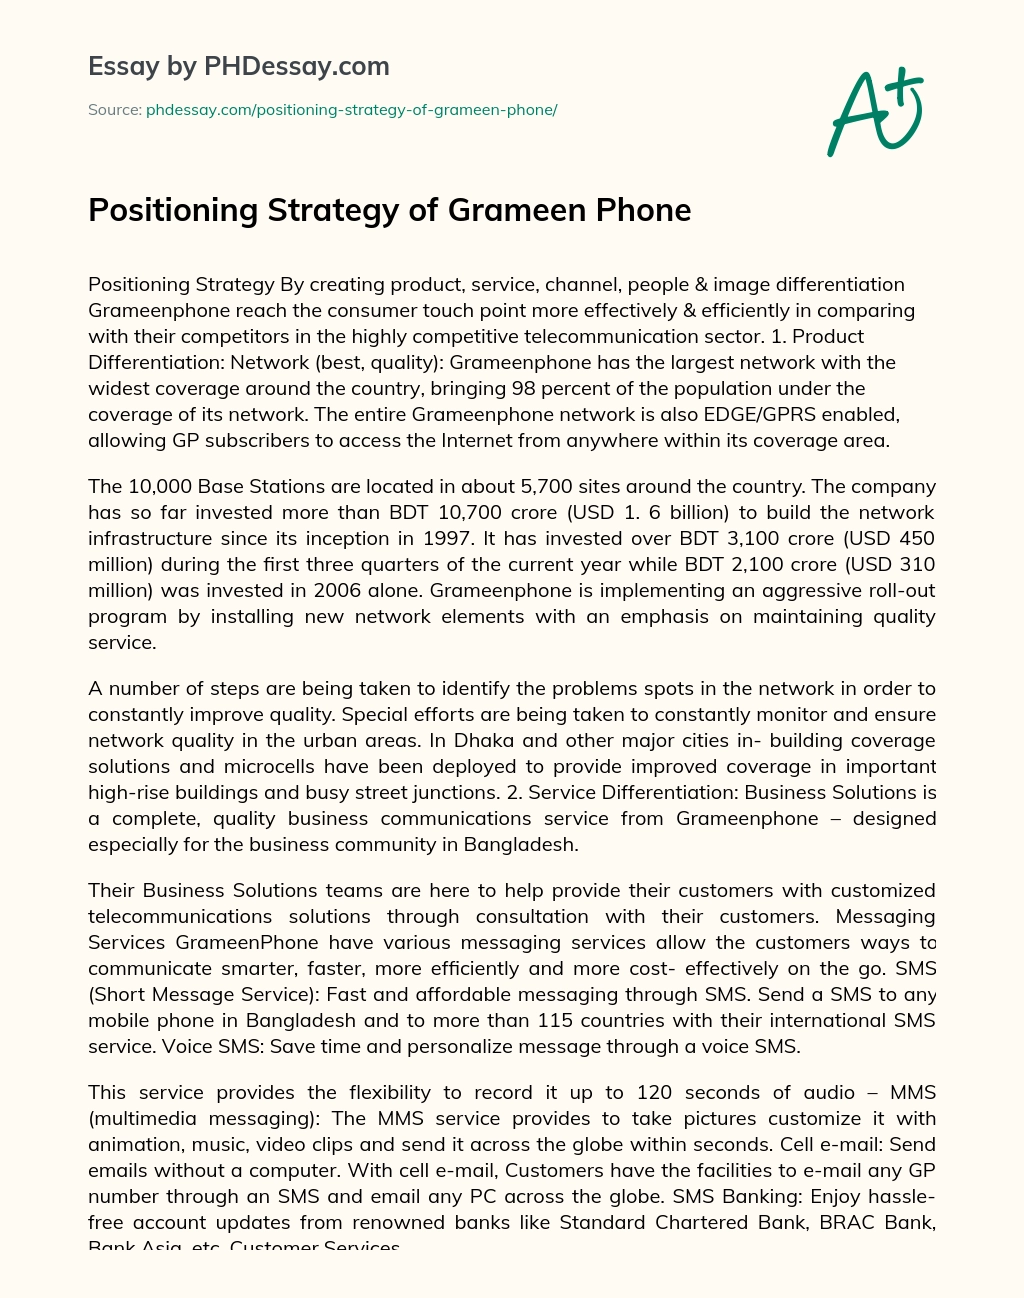 Positioning Strategy of Grameen Phone essay